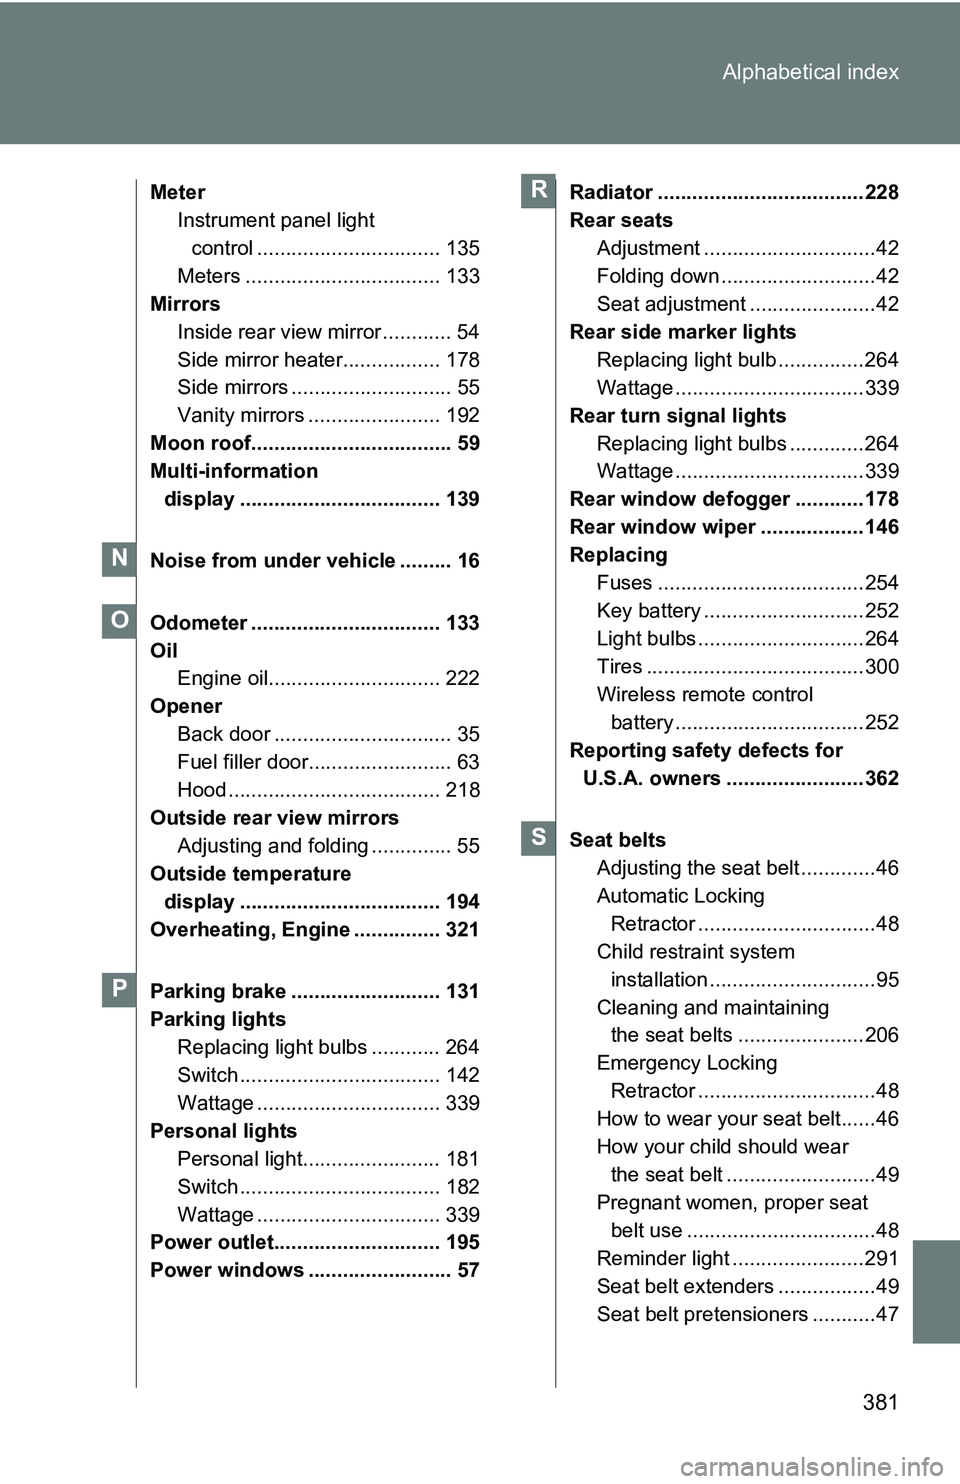 TOYOTA xB 2011  Owners Manual (in English) 381
Alphabetical index
Meter
Instrument panel light 
control ................................ 135
Meters .................................. 133
Mirrors
Inside rear view mirror ............ 54
Side mir